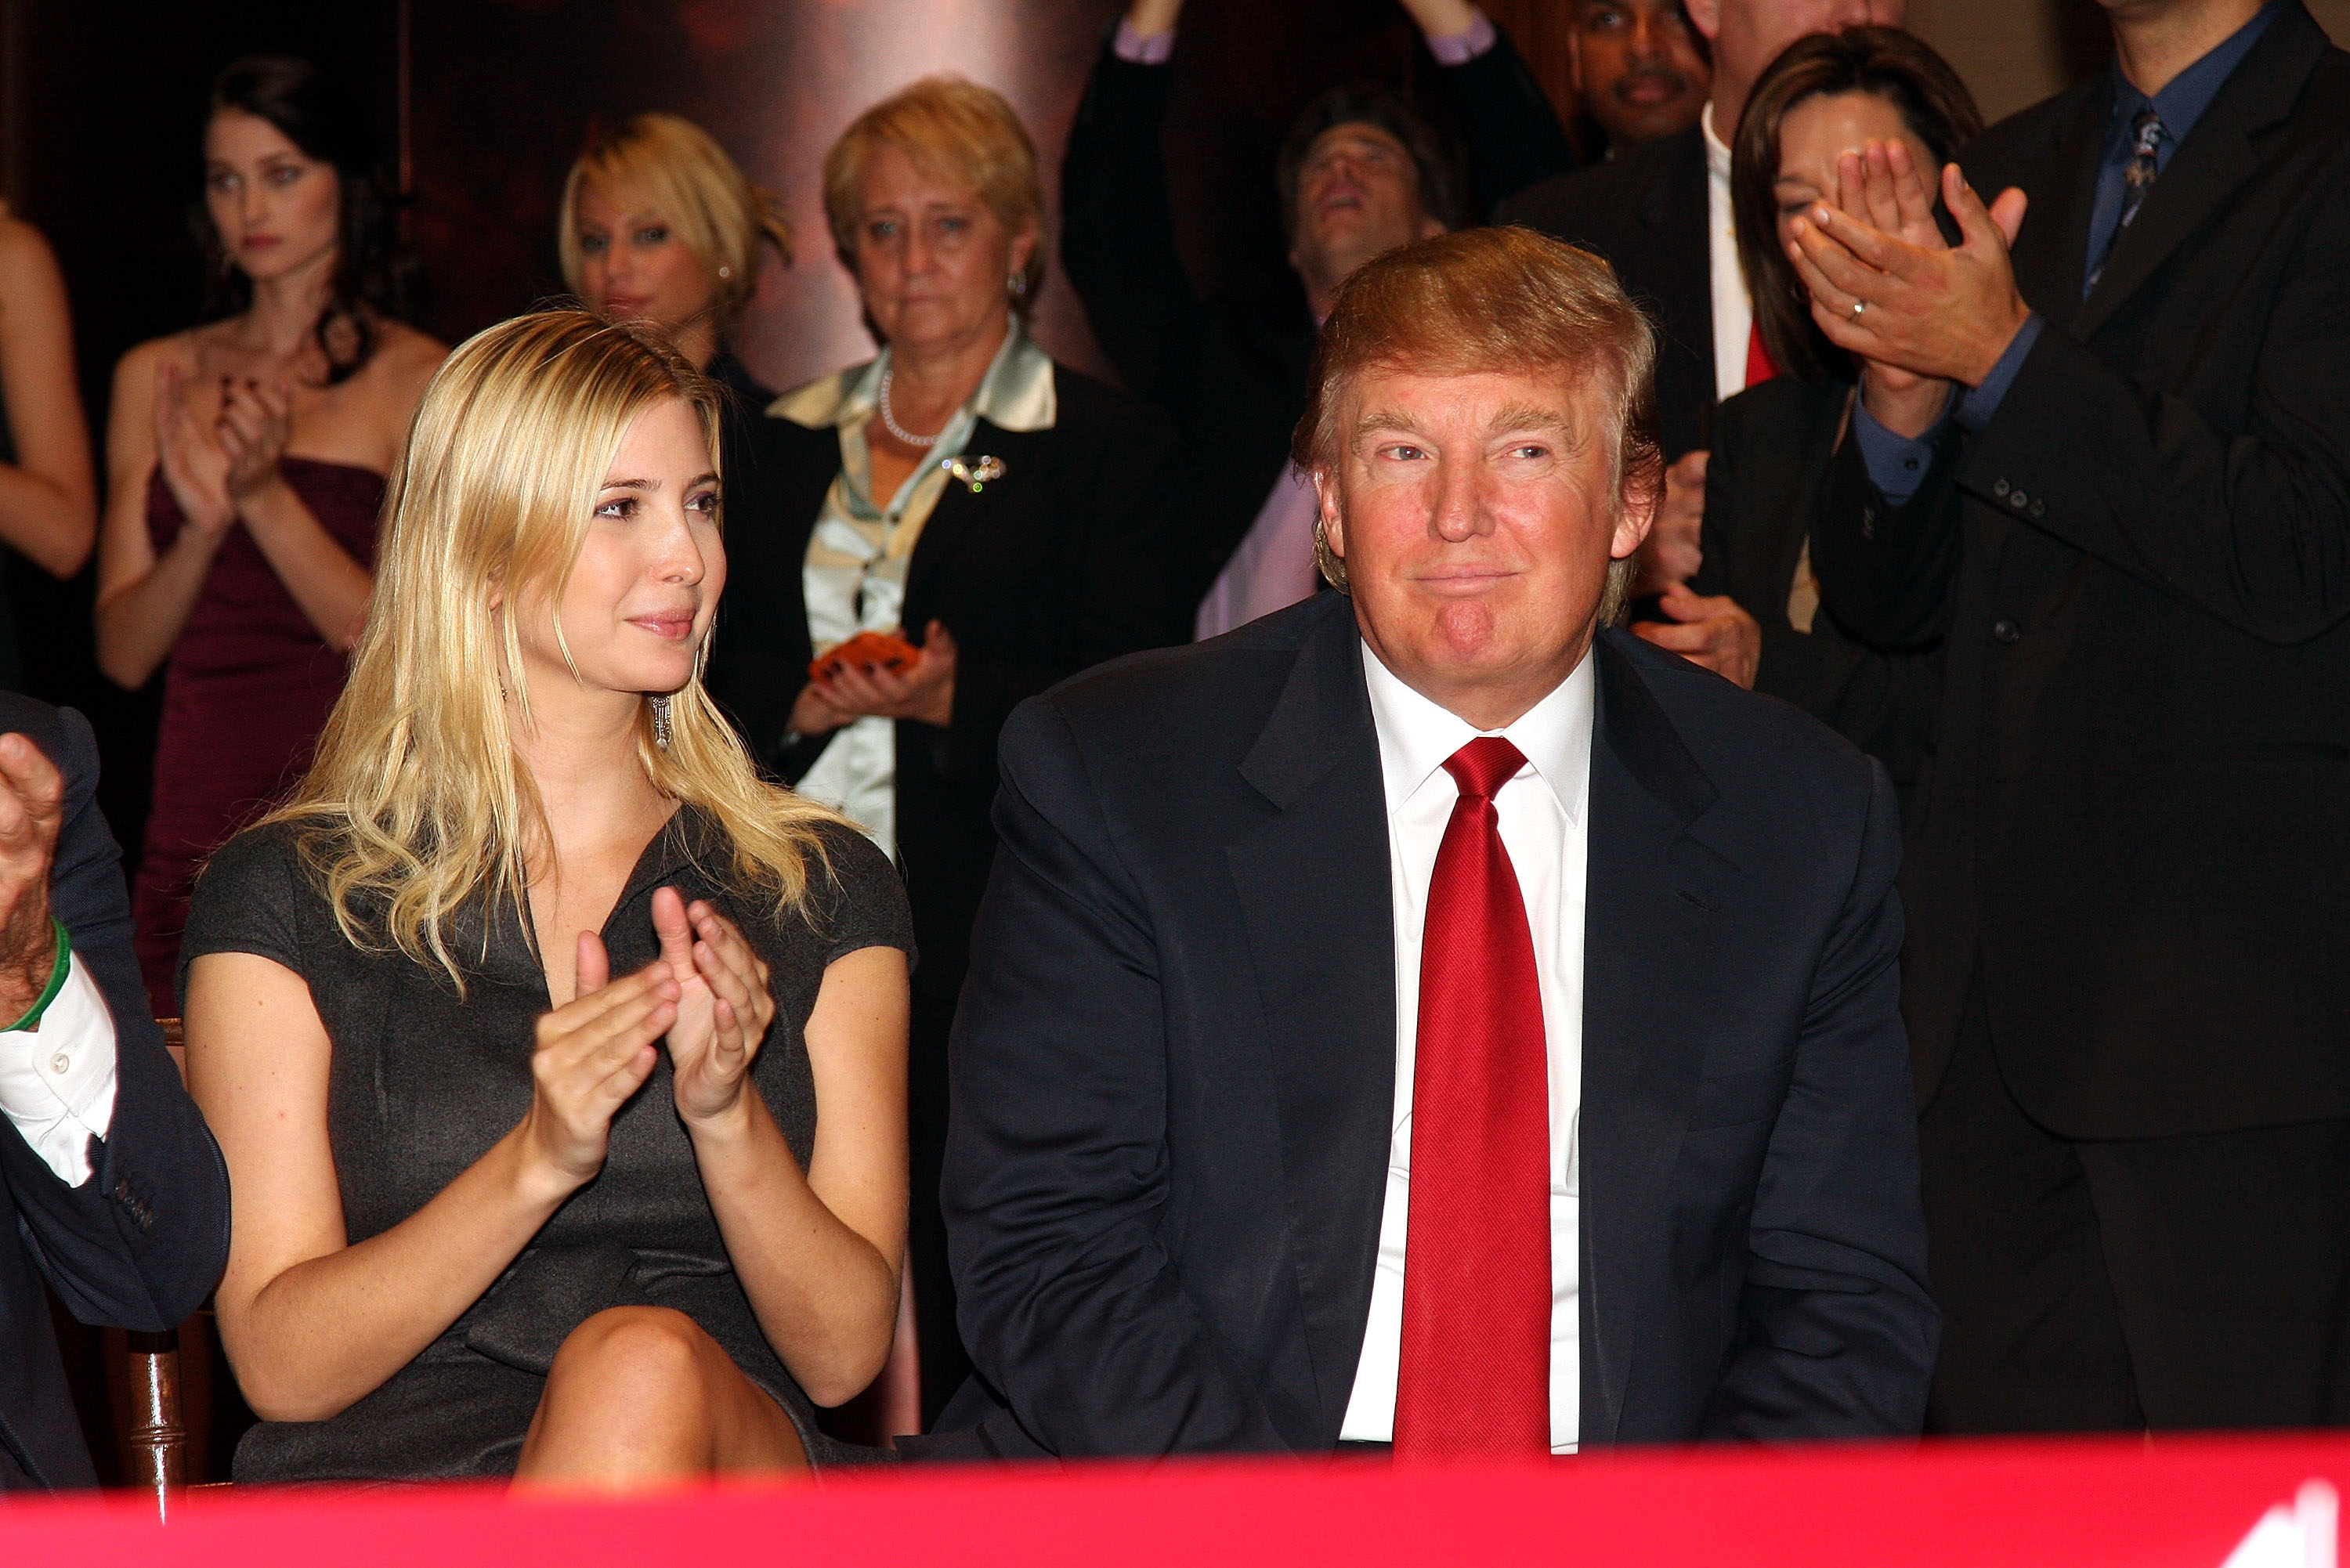 ATLANTIC CITY, NJ - OCTOBER 02:  Donald Trump and Ivanka Trump, Vice President of Development and Acquisitions for Trump Organization, attend the Ribbon Cutting Ceremony to celebrate the opening of The Chairman Tower at the Trump Taj Mahal October 2, 2008 Atlantic City, New Jersey. (Bill McCay—WireImage/Getty Images)